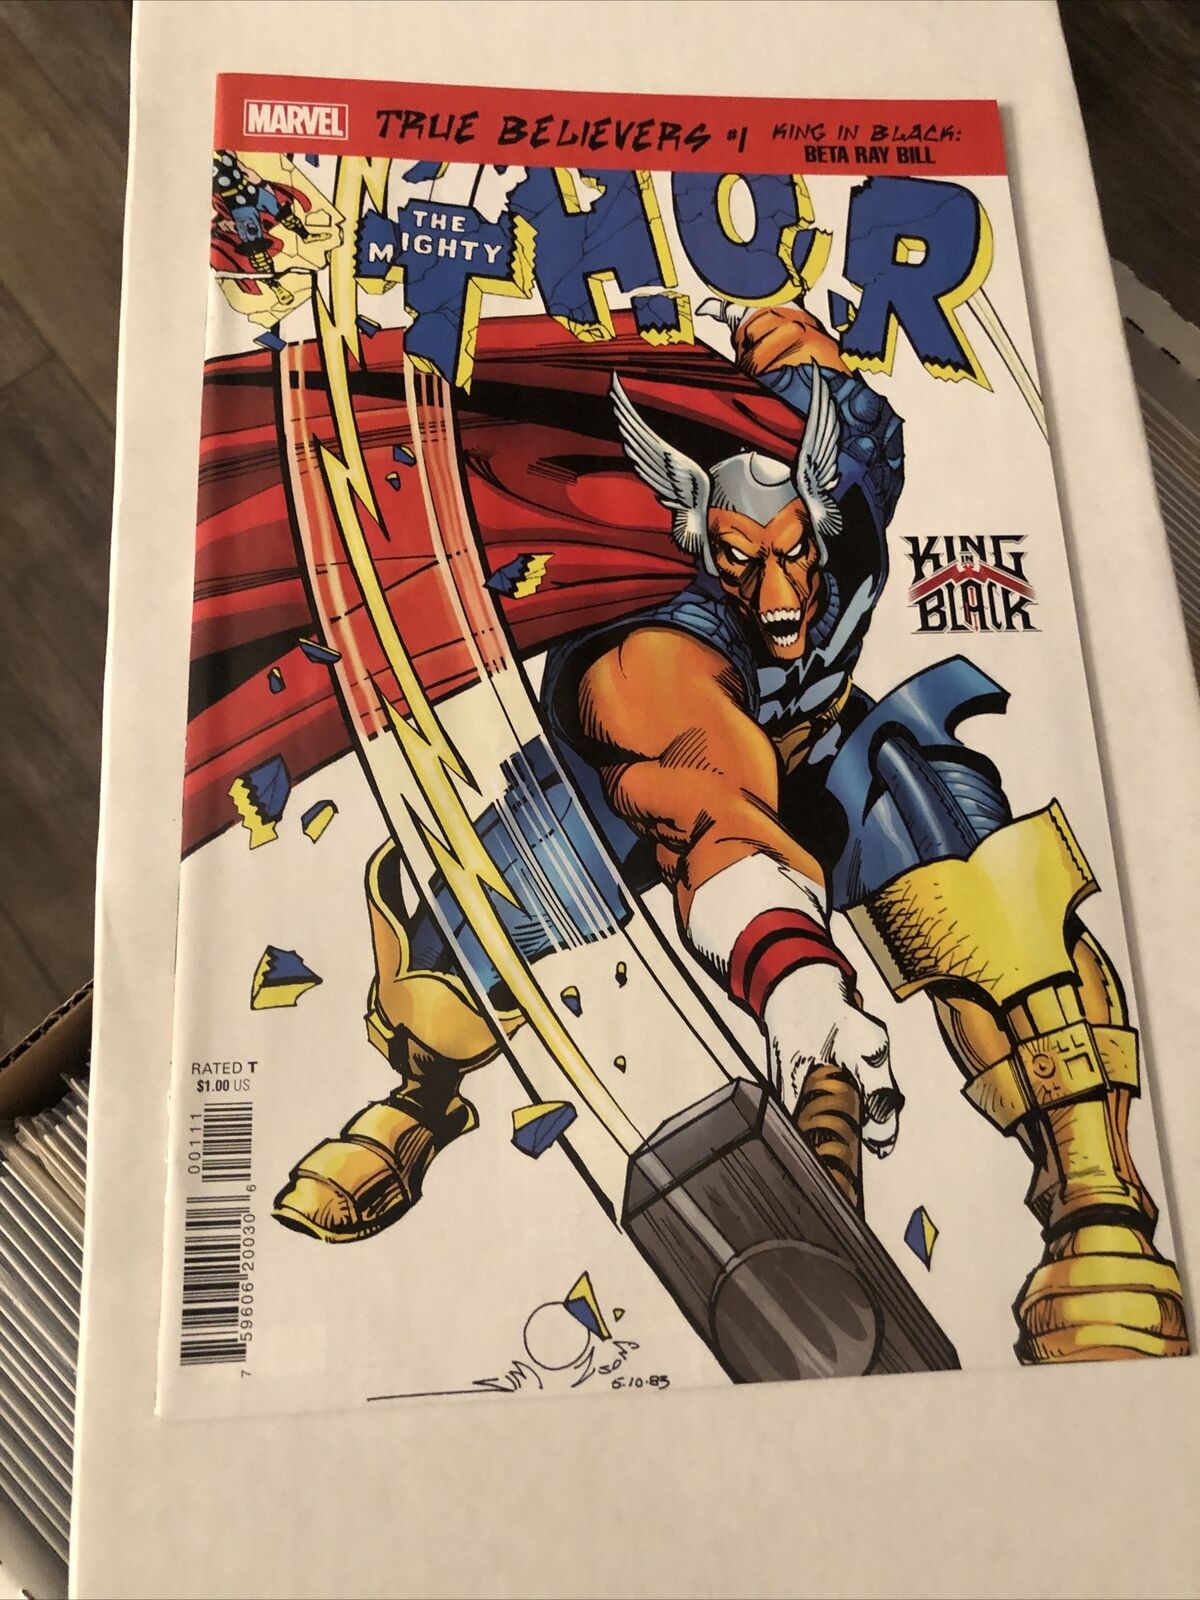 Thor #337 Reprint True Believers Beta Ray Bill 2020 Solid 9.6 or Better